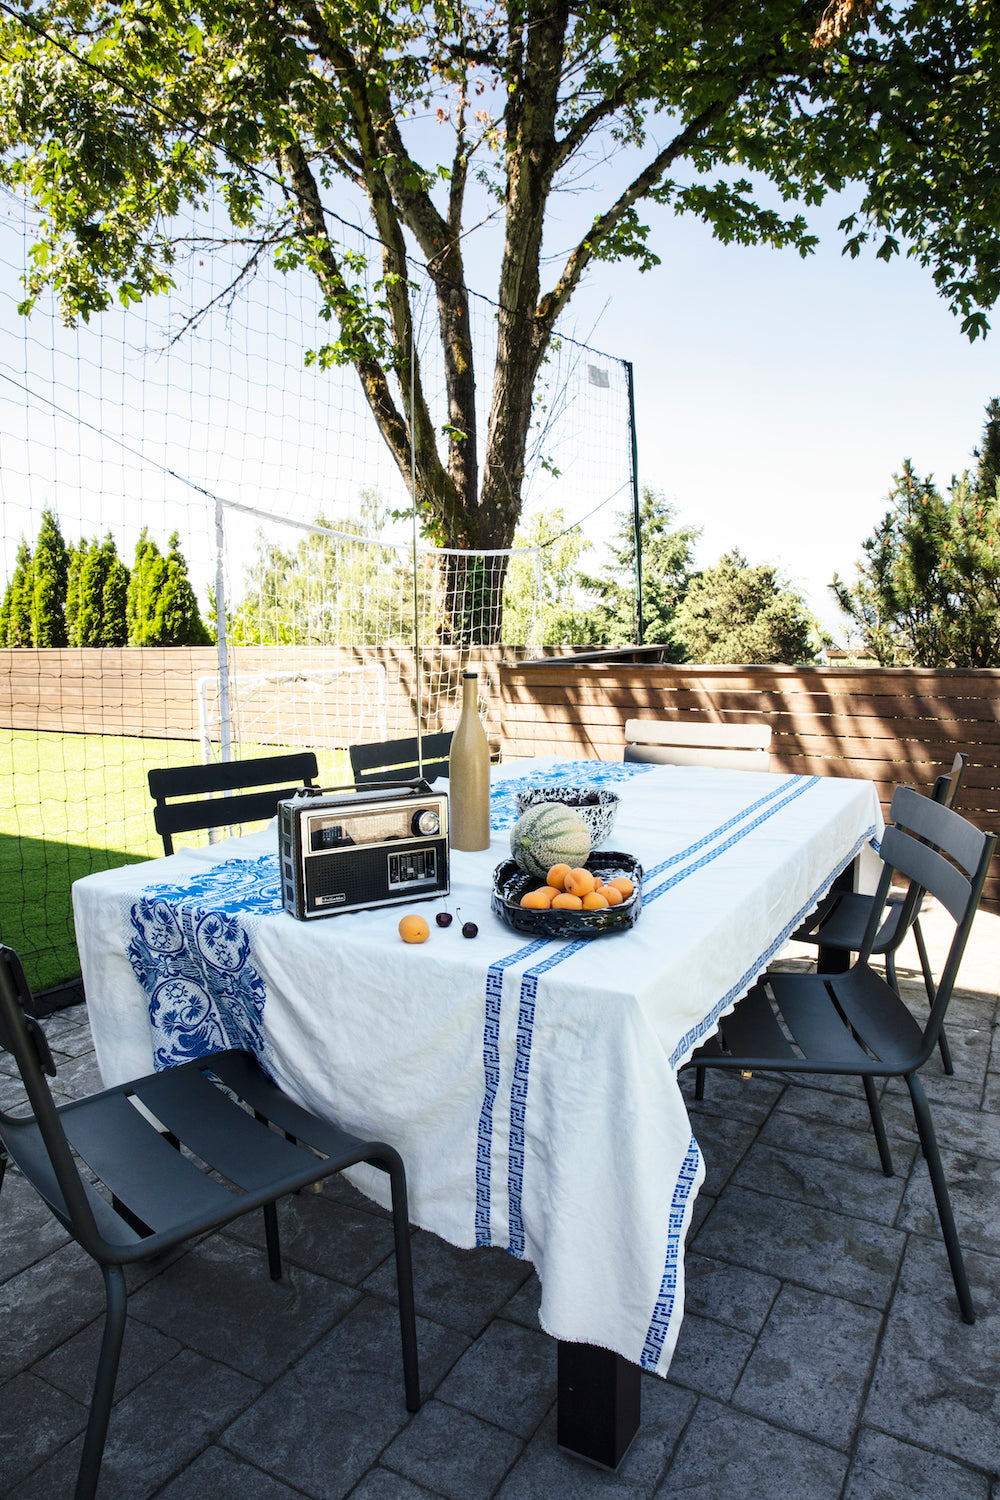 picnic table with tablecloth outdoors